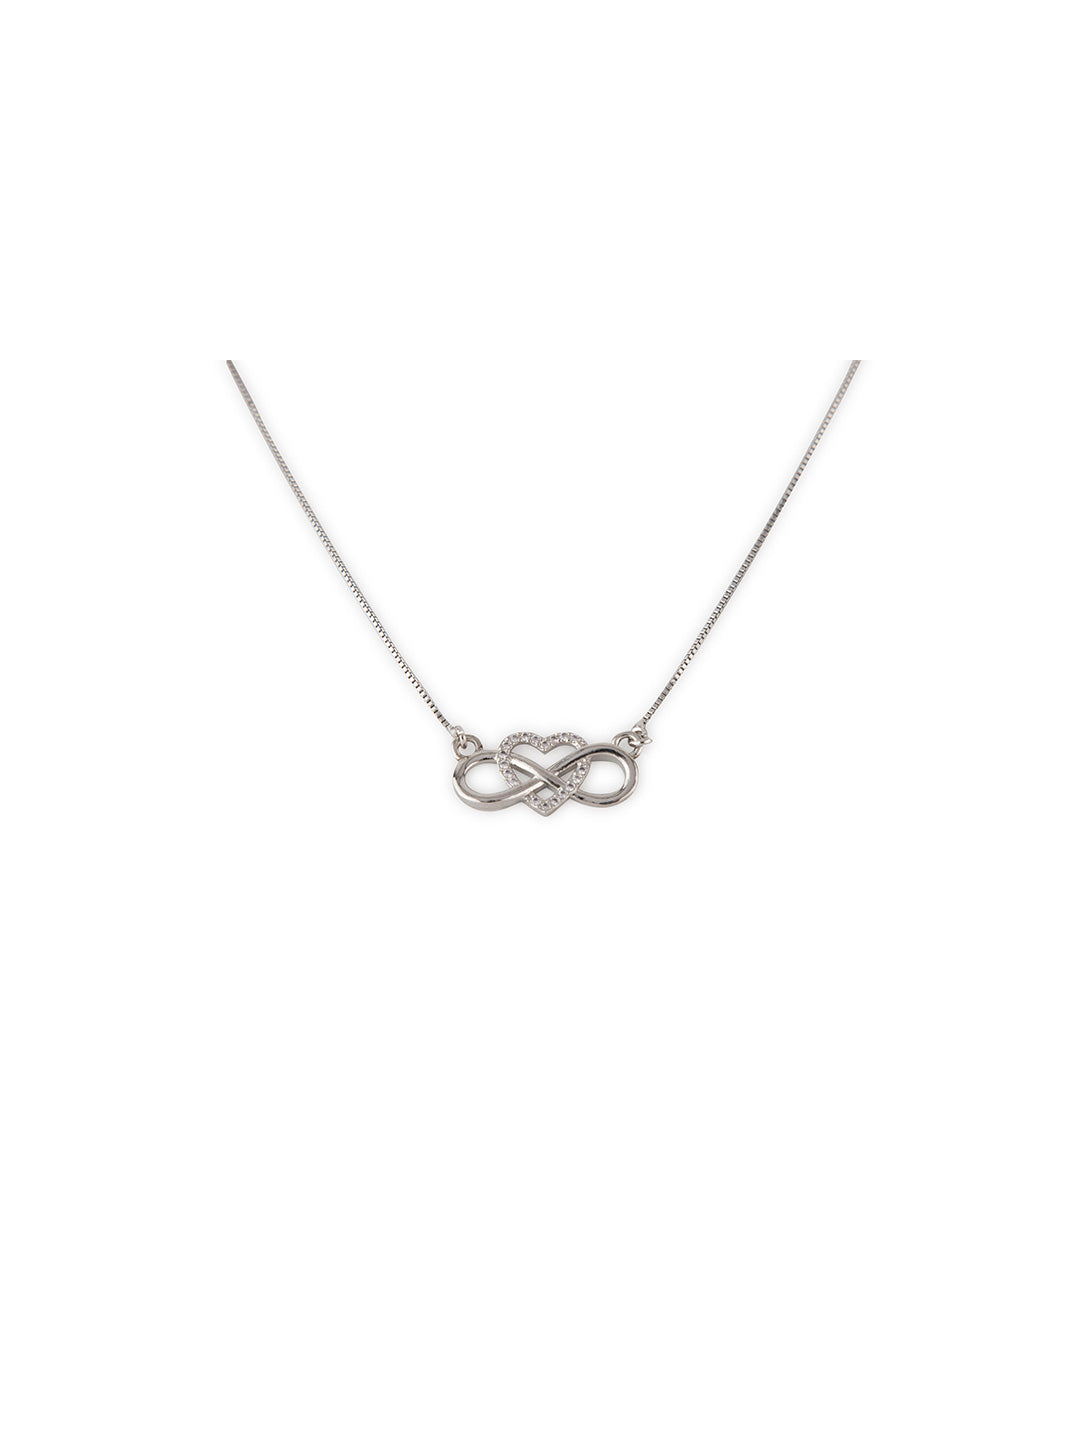 Prita by Priyaasi Silver Plated Studded Infinity-Heart Necklace